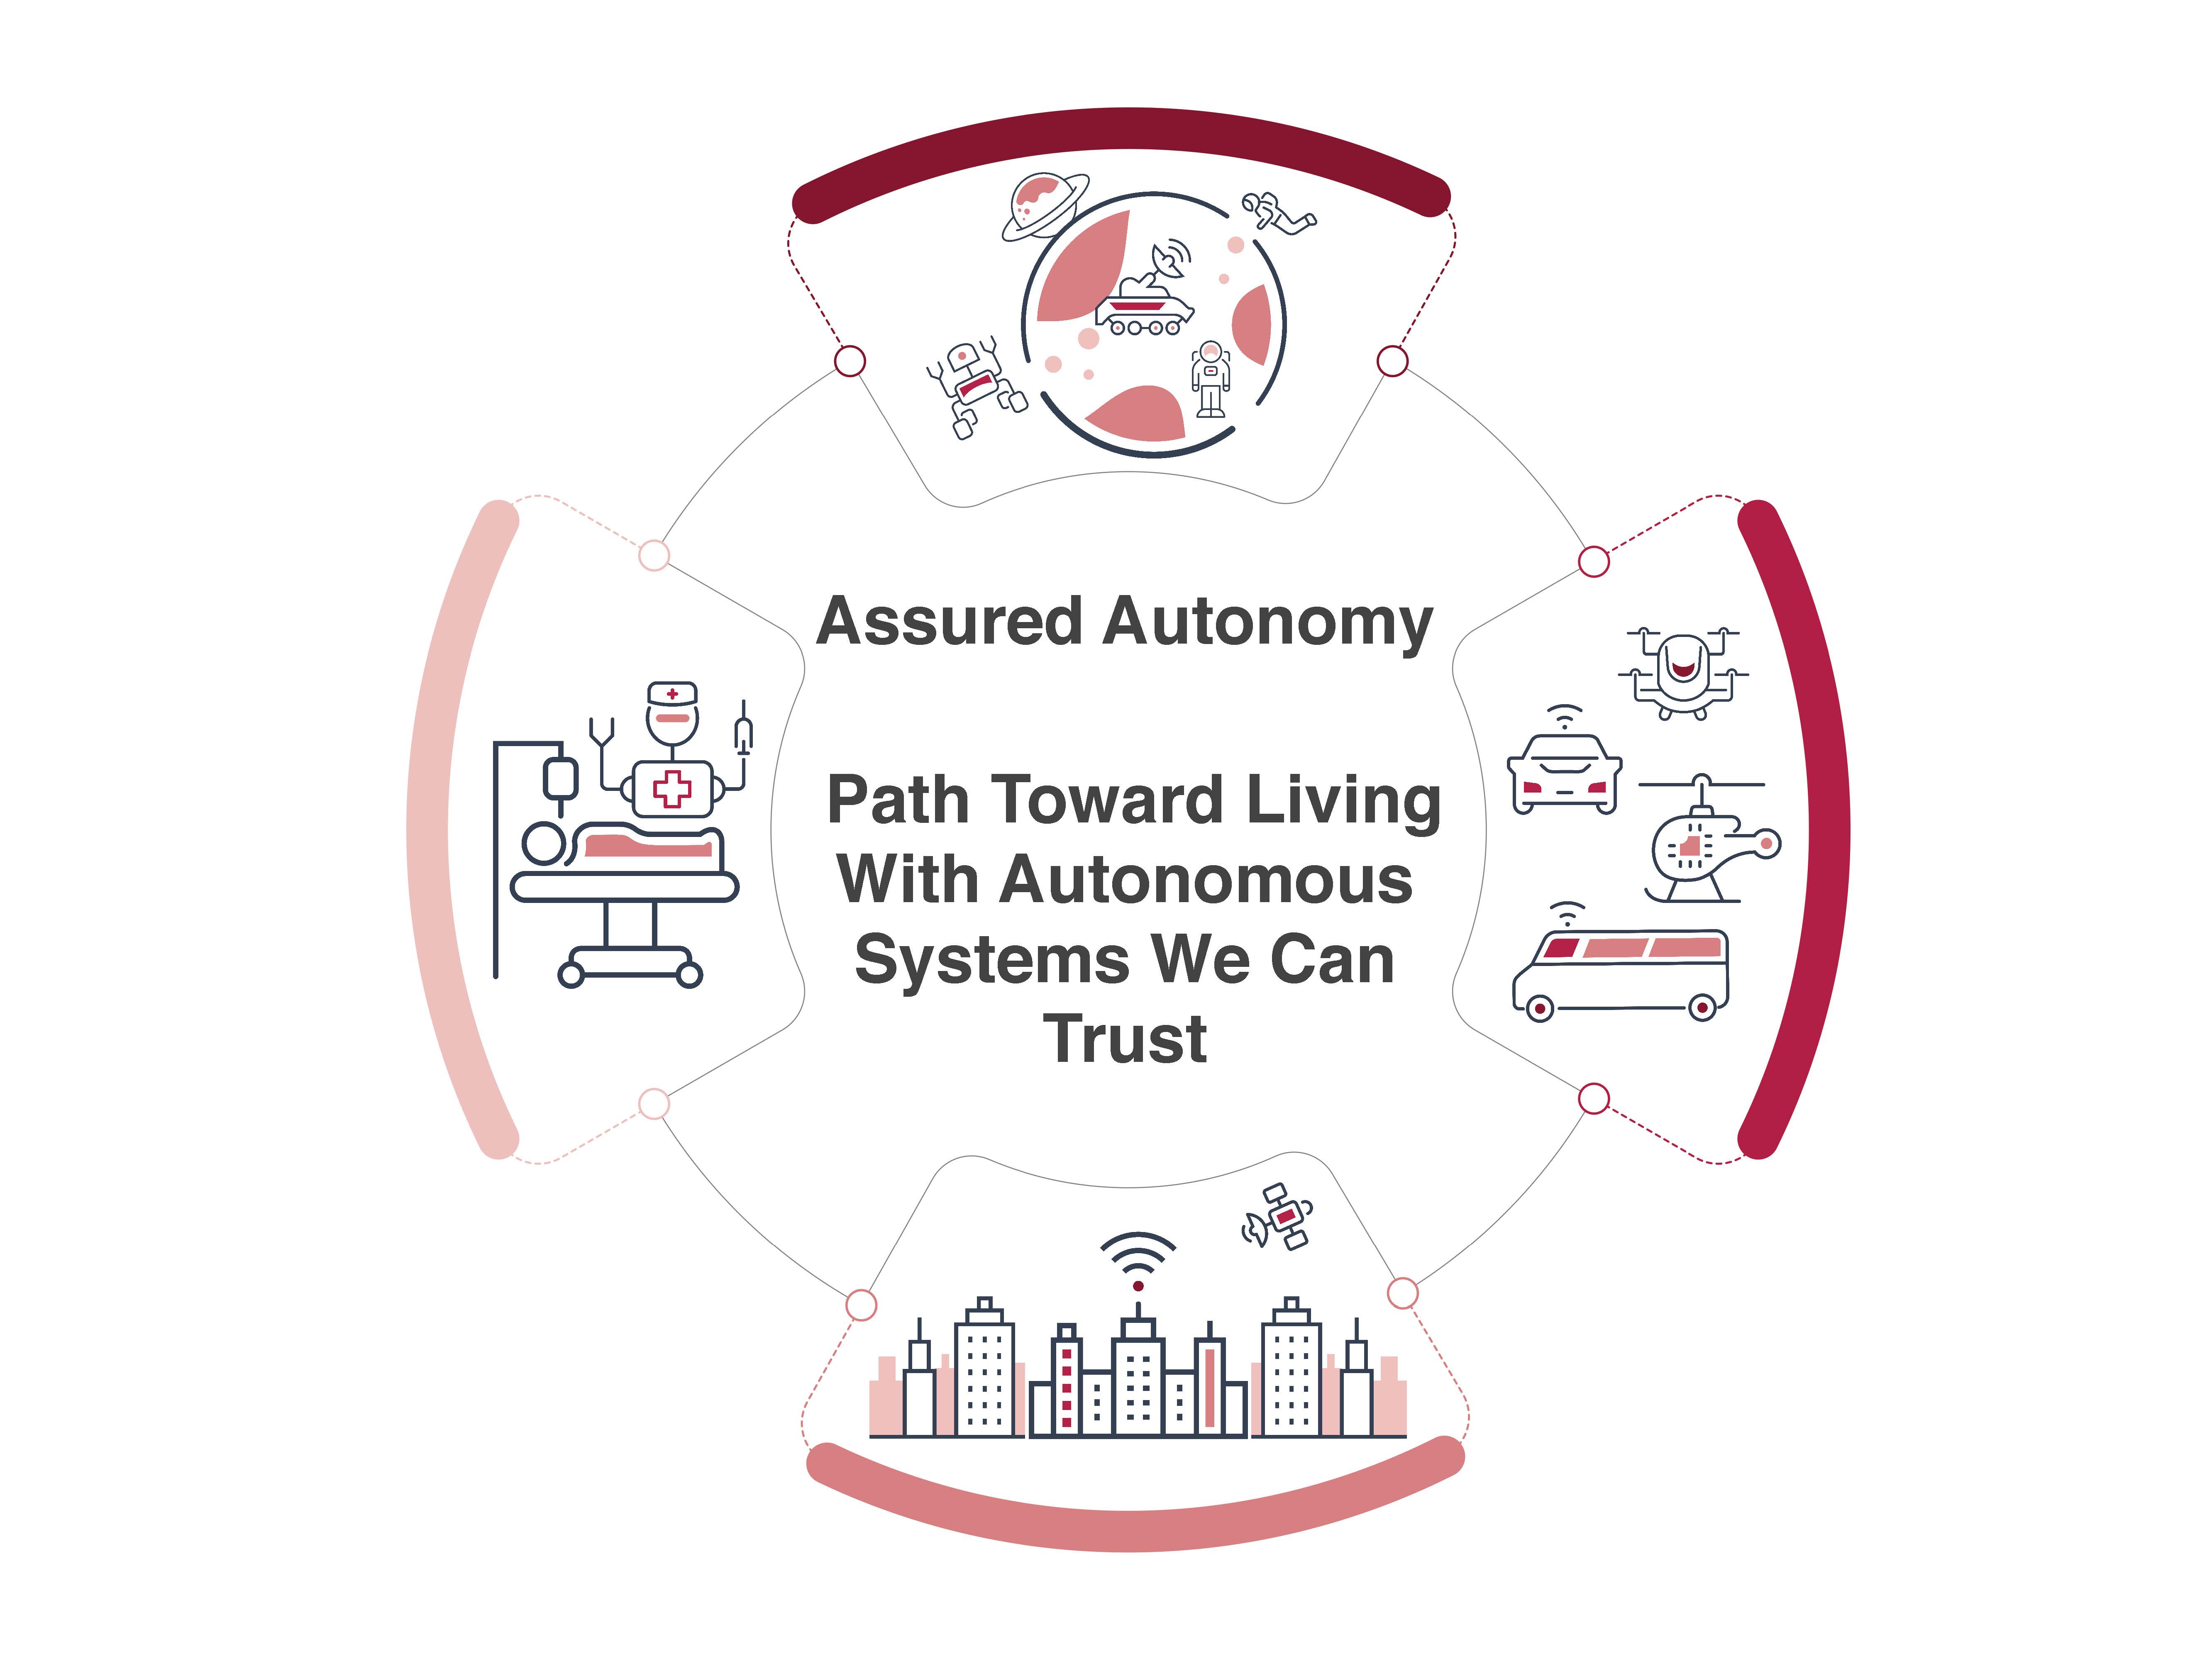 More Voices Needed to Design Autonomous Systems ‘We Can Trust’  